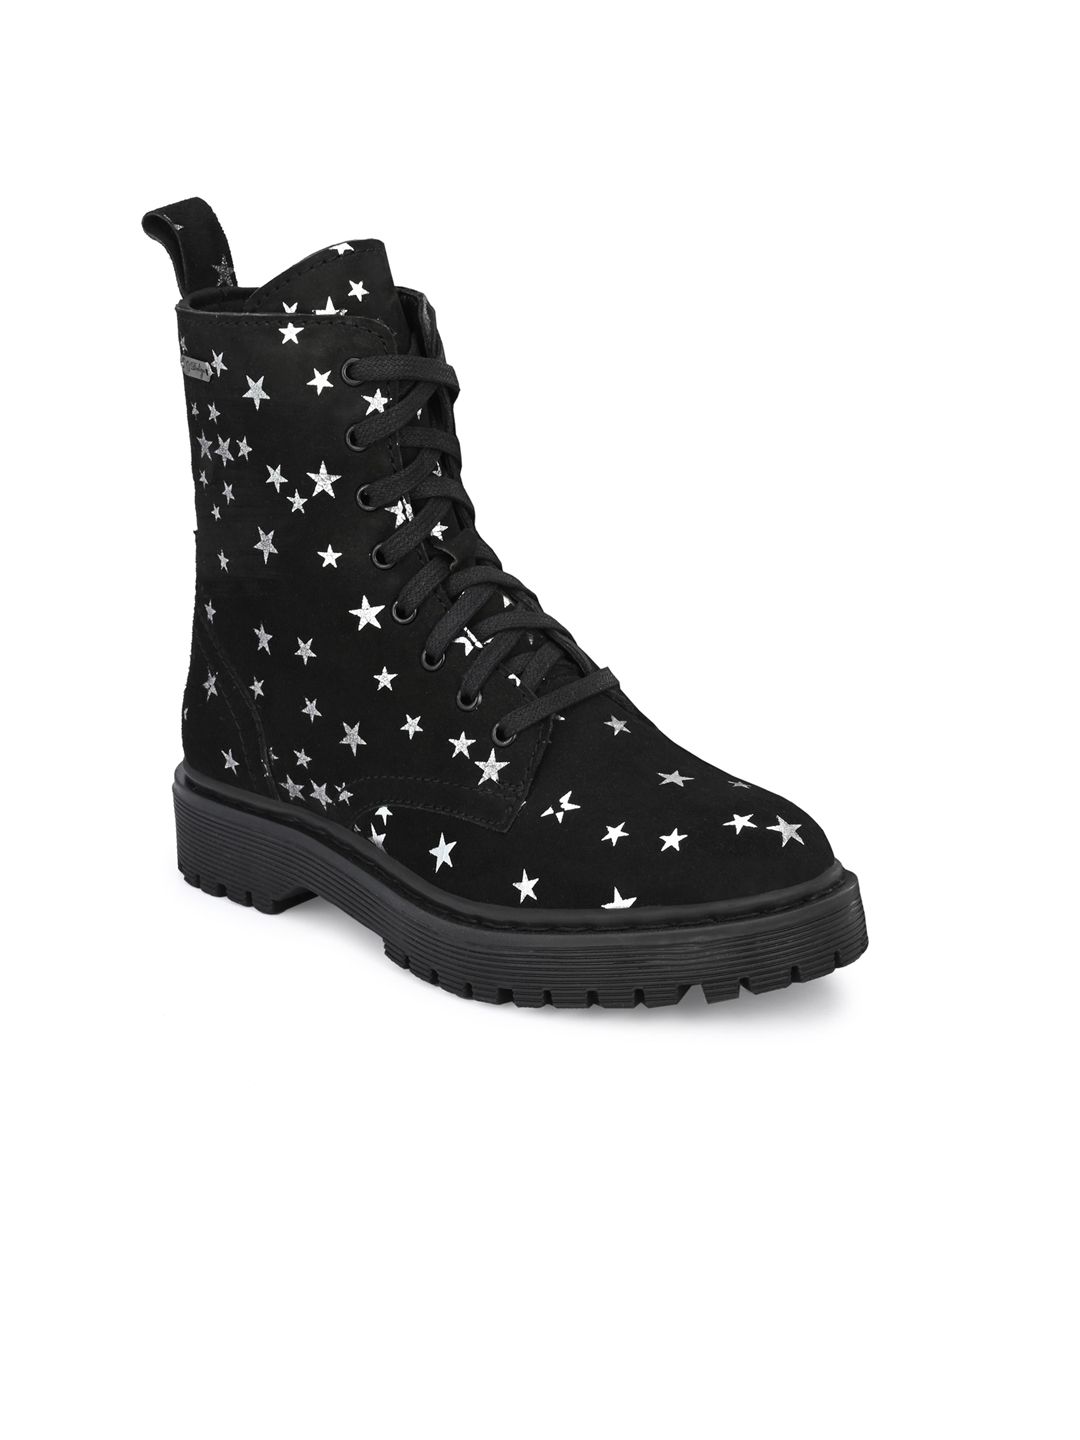 Delize Black Printed Suede Party High-Top Block Heeled Boots Price in India